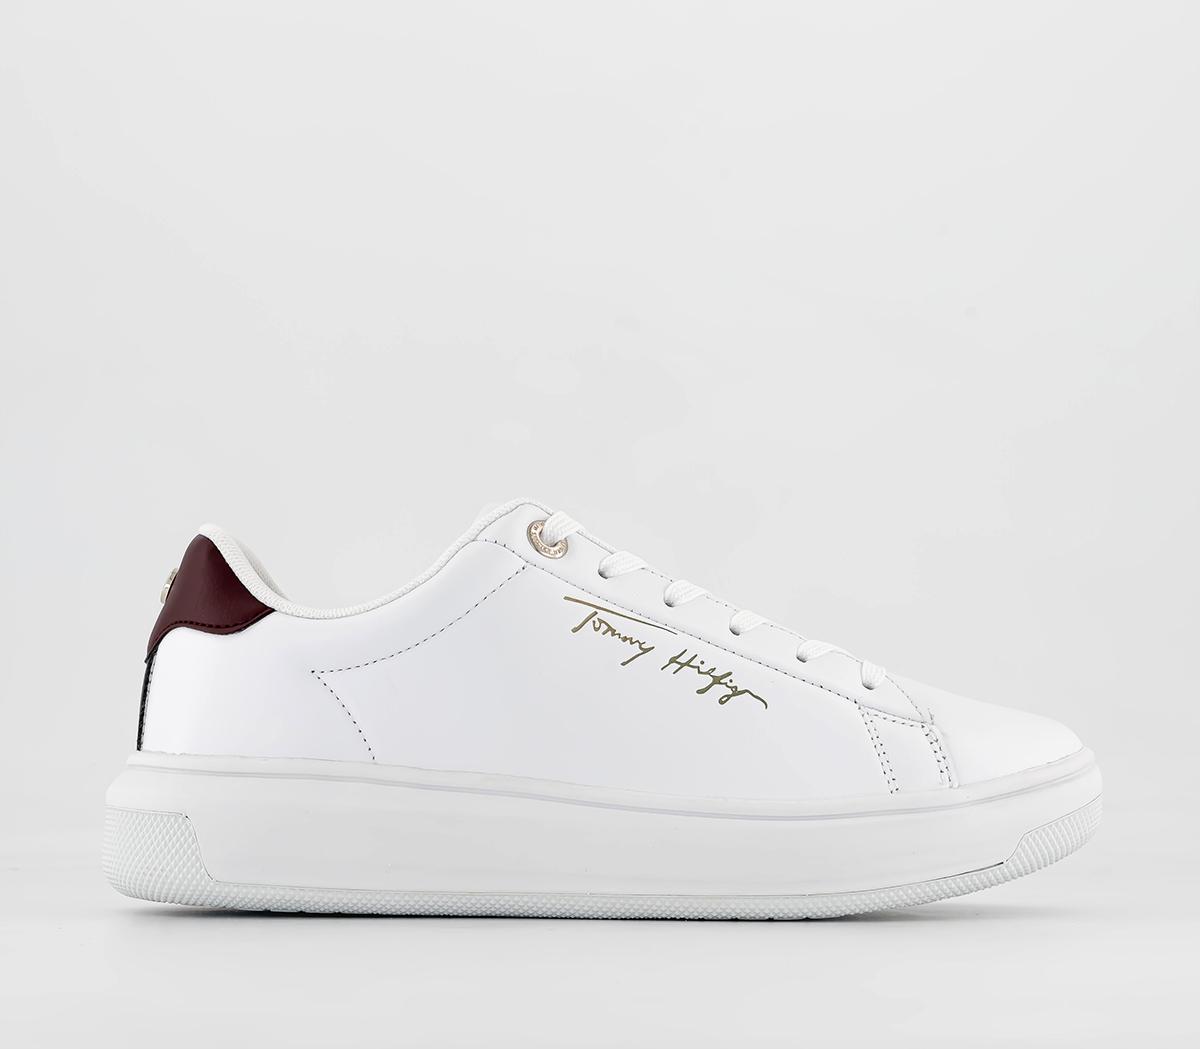 emne fire trappe Tommy Hilfiger Signature Court Sneakers White Red - Women's Trainers